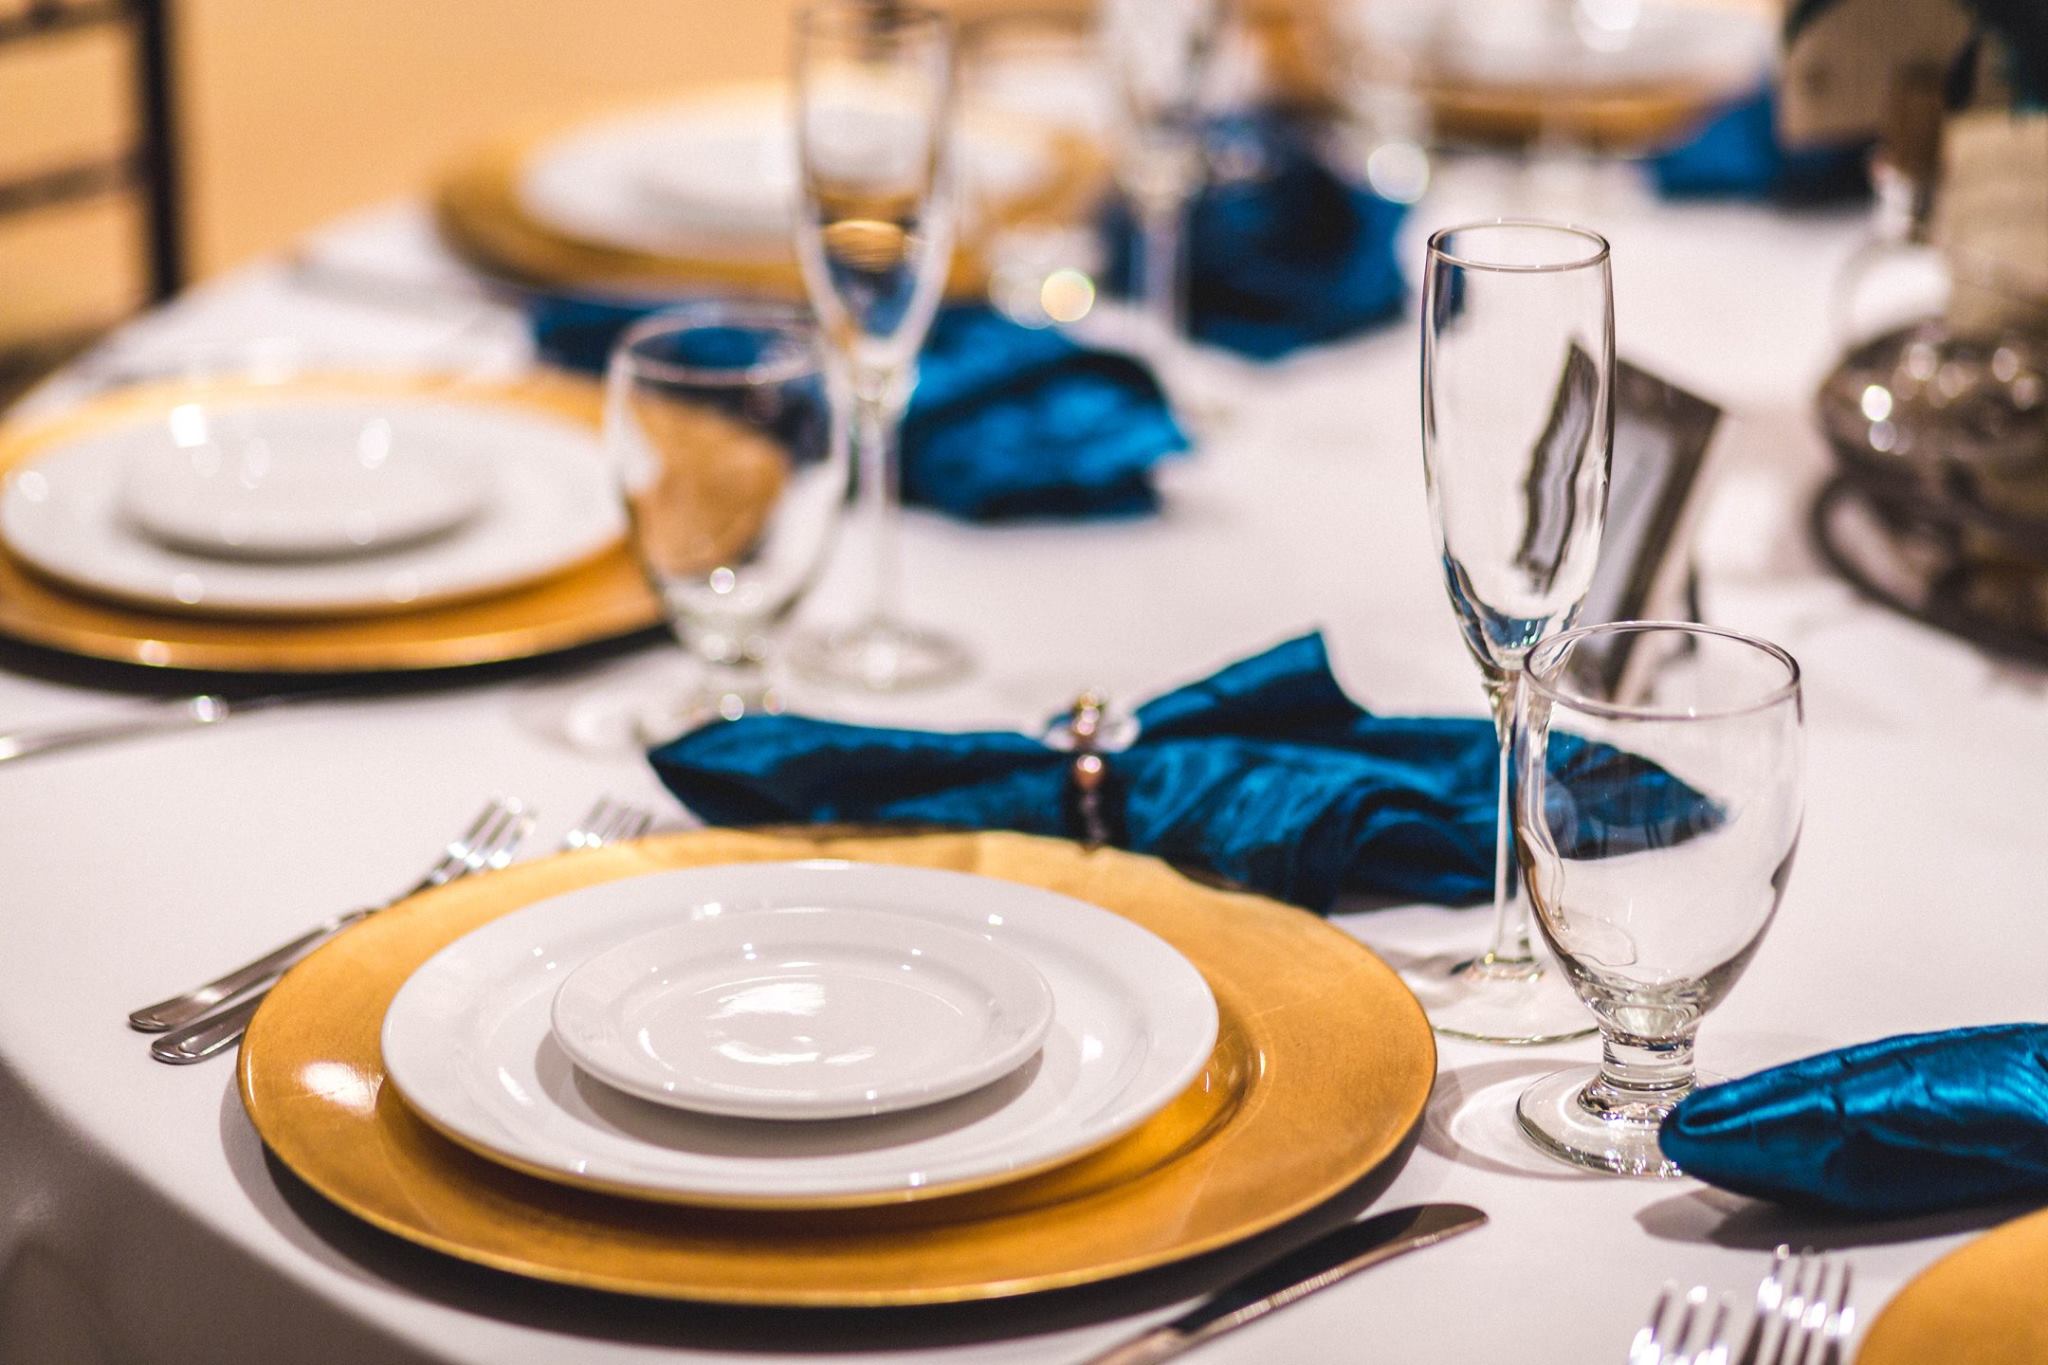 Showing a white tablecloth, white plates with brass accents, and blue napkins.